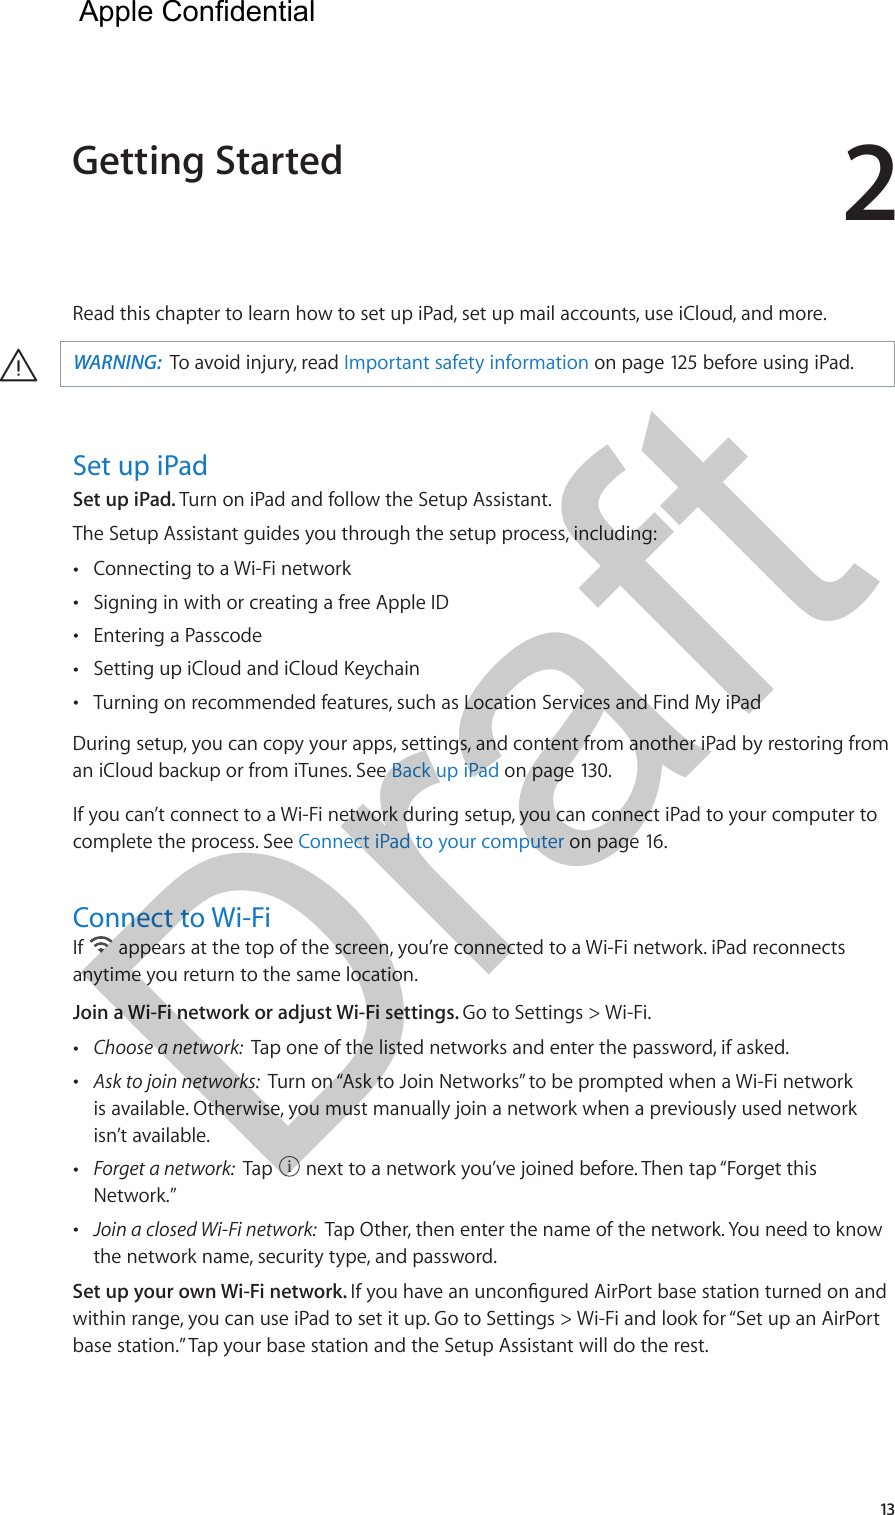 213Read this chapter to learn how to set up iPad, set up mail accounts, use iCloud, and more. ·WARNING:  To avoid injury, read Important safety information on page 125 before using iPad.Set up iPadSet up iPad. Turn on iPad and follow the Setup Assistant.The Setup Assistant guides you through the setup process, including:  •Connecting to a Wi-Fi network •Signing in with or creating a free Apple ID •Entering a Passcode •Setting up iCloud and iCloud Keychain •Turning on recommended features, such as Location Services and Find My iPadDuring setup, you can copy your apps, settings, and content from another iPad by restoring from an iCloud backup or from iTunes. See Back up iPad on page 130.If you can’t connect to a Wi-Fi network during setup, you can connect iPad to your computer to complete the process. See Connect iPad to your computer on page 16.Connect to Wi-FiIf   appears at the top of the screen, you’re connected to a Wi-Fi network. iPad reconnects anytime you return to the same location.Join a Wi-Fi network or adjust Wi-Fi settings. Go to Settings &gt; Wi-Fi. •Choose a network:  Tap one of the listed networks and enter the password, if asked. •Ask to join networks:  Turn on “Ask to Join Networks” to be prompted when a Wi-Fi networkis available. Otherwise, you must manually join a network when a previously used networkisn’t available. •Forget a network:  Tap   next to a network you’ve joined before. Then tap “Forget thisNetwork.” •Join a closed Wi-Fi network:  Tap Other, then enter the name of the network. You need to knowthe network name, security type, and password.Set up your own Wi-Fi network. If you have an uncongured AirPort base station turned on and within range, you can use iPad to set it up. Go to Settings &gt; Wi-Fi and look for “Set up an AirPort base station.” Tap your base station and the Setup Assistant will do the rest.Getting Started  Apple Confidential Draft